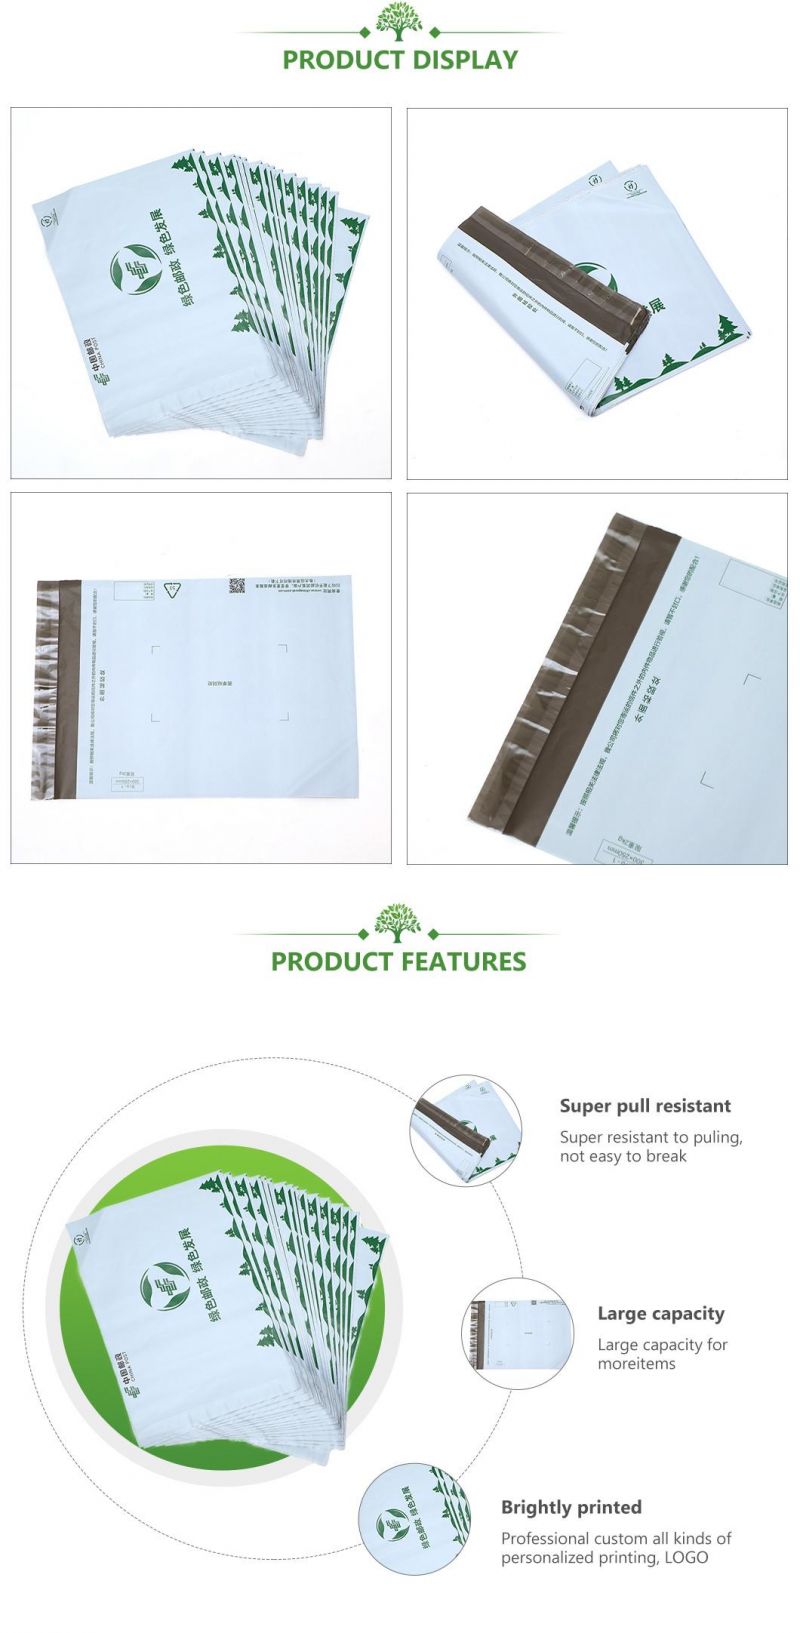 China 100% Biodegradable and Compostable Poly Mailer Bags Courier Bags. Delivery Bags, Mailing Bags, Express Bags Manufacturer/Supplier/Factory/Wholesale